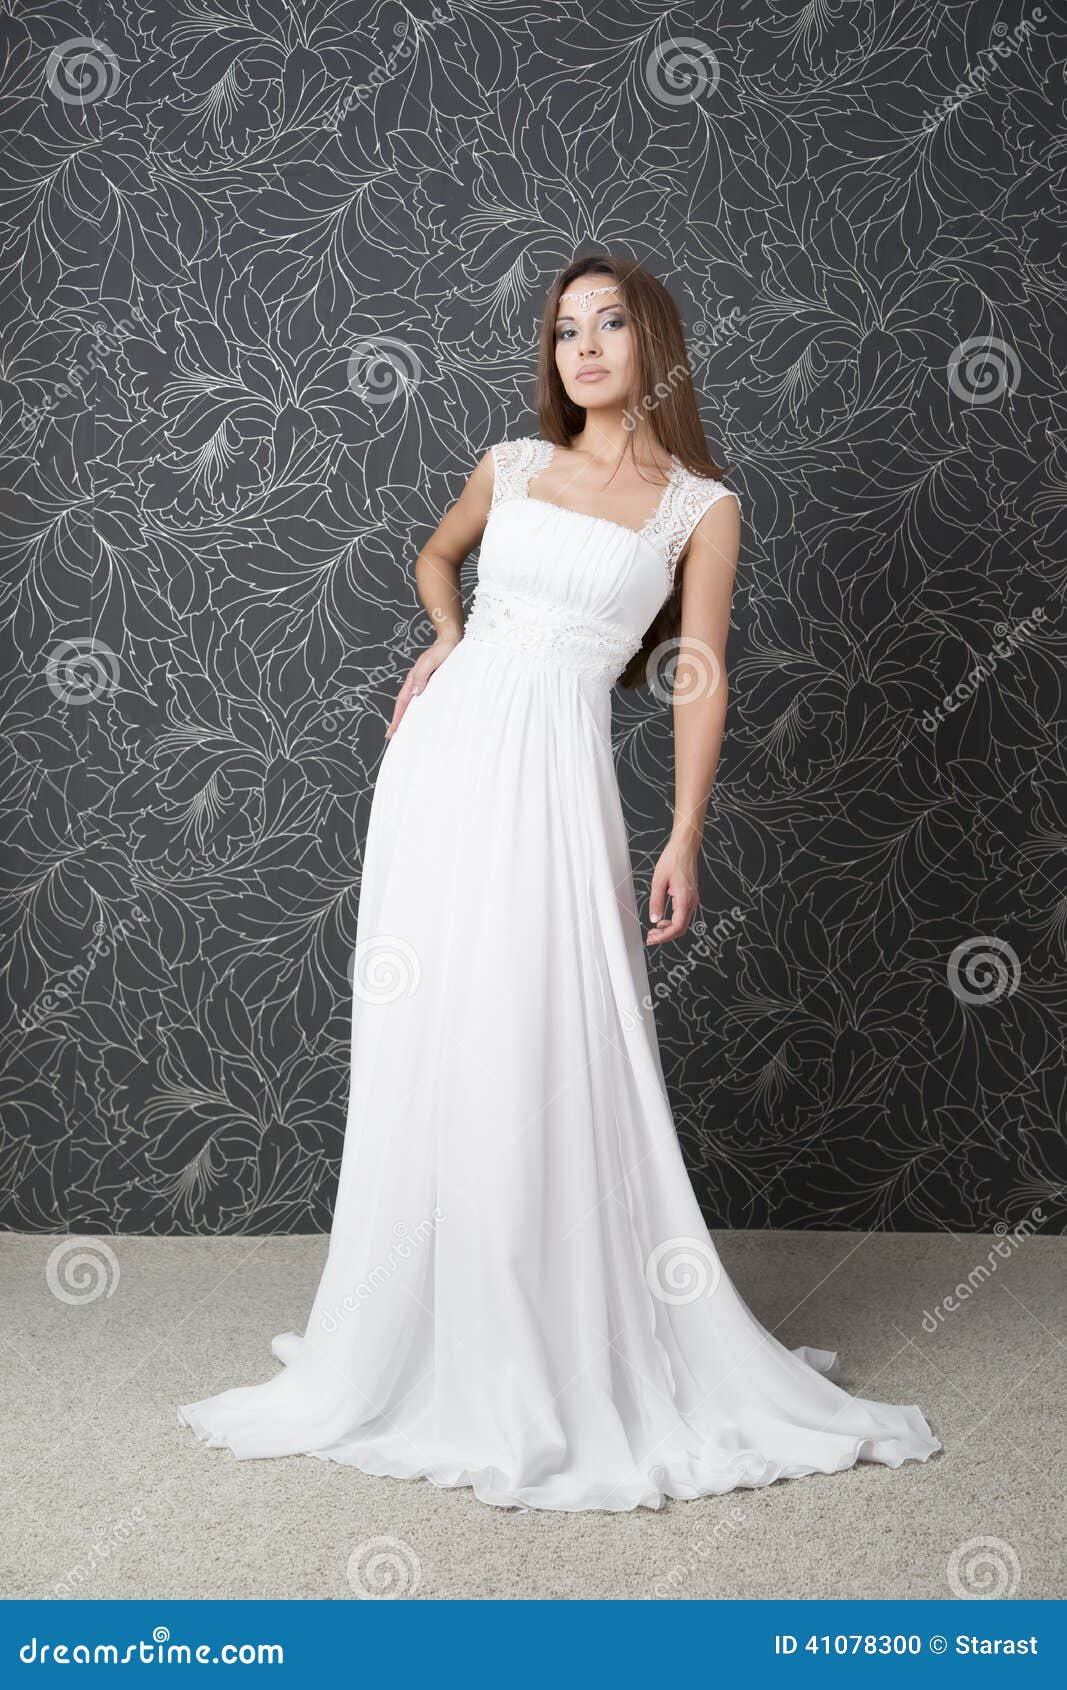 Buy GOWNLINK Christian Ball Gown Wedding Dress (US 2) White at Amazon.in